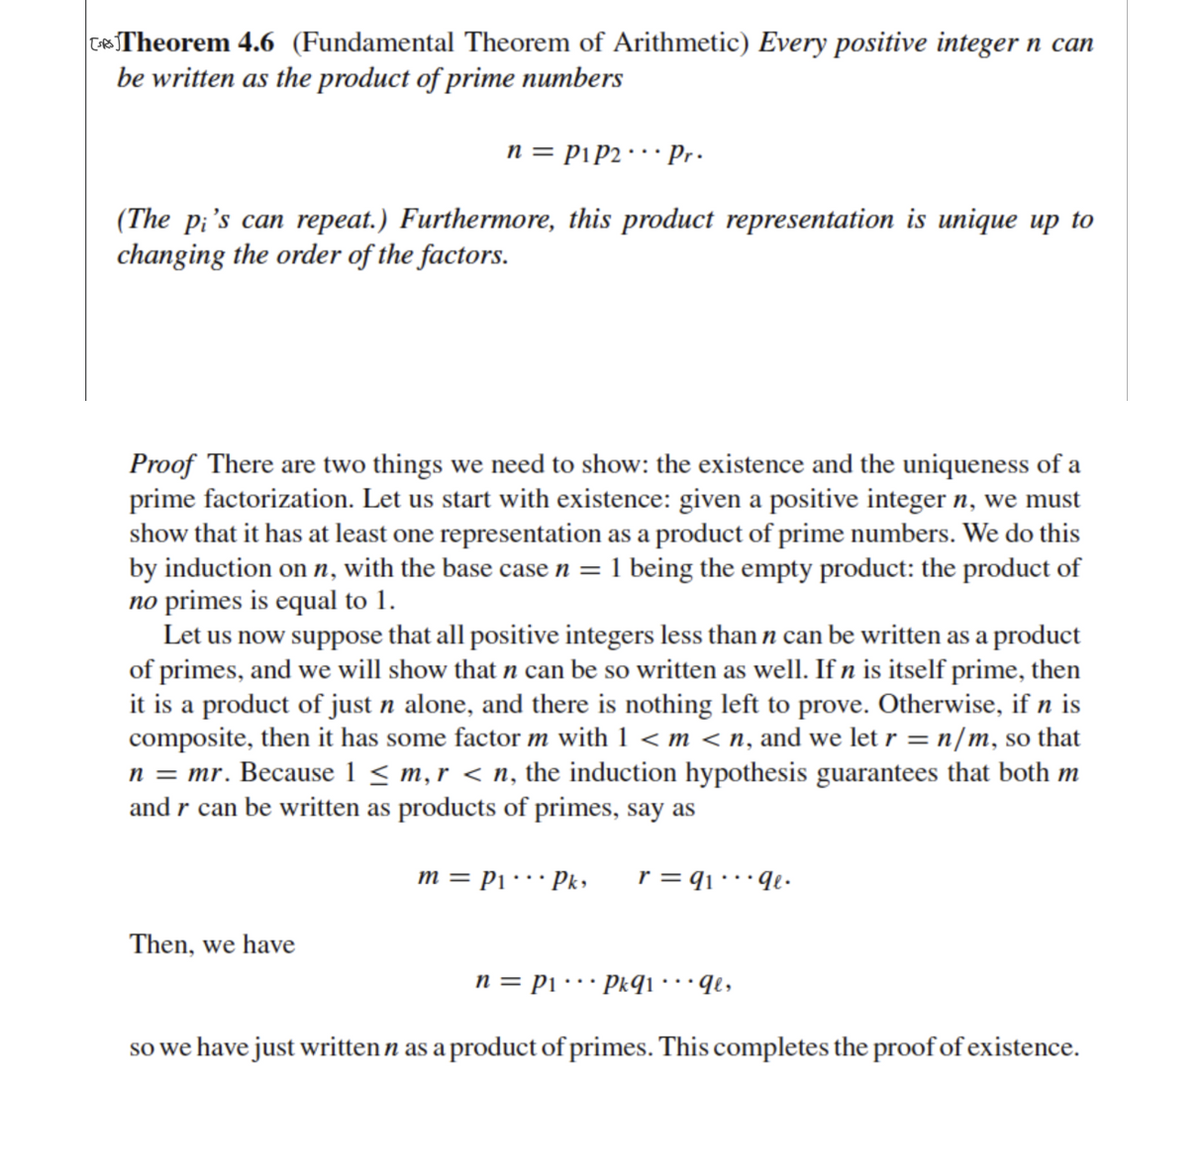 CTheorem 4.6 (Fundamental Theorem of Arithmetic) Every positive integer n can
be written as the product of prime numbers
n = Pip2· · Pr.
(The pi's can repeat.) Furthermore, this product representation is unique up to
changing the order of the factors.
Proof There are two things we need to show: the existence and the uniqueness of a
prime factorization. Let us start with existence: given a positive integer n, we must
show that it has at least one representation as a product of prime numbers. We do this
by induction on n, with the base case n =1 being the empty product: the product of
no primes is equal to 1.
Let us now suppose that all positive integers less than n can be written as a product
of primes, and we will show that n can be so written as well. If n is itself prime, then
it is a product of just n alone, and there is nothing left to prove. Otherwise, if n is
composite, then it has some factor m with 1 < m < n, and we let r = n/m, so that
n = mr. Because 1 < m, r < n, the induction hypothesis guarantees that both m
and r can be written as products of primes, say as
m = P1· Pk»
r = q1· · · qe•
Then, we have
n = Pi ·…· Pkqi• • • ¶e,
so we have just written n as a product of primes. This completes the proof of existence.
